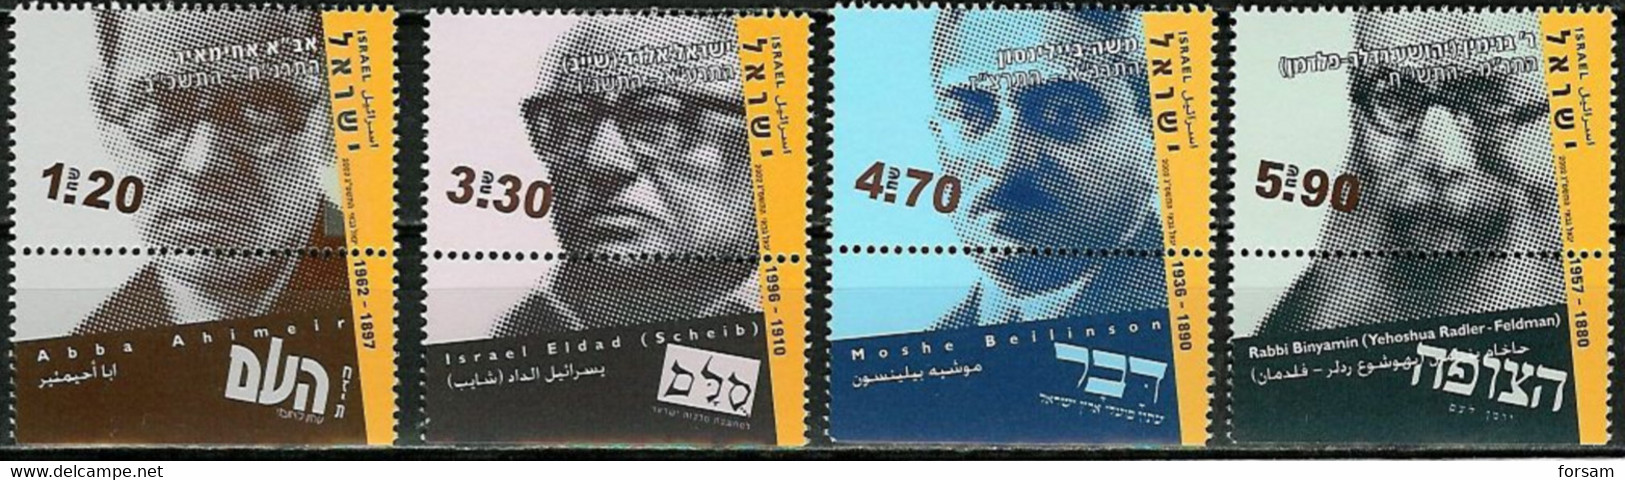 ISRAEL..2002..Michel # 1706-1709...MNH. - Unused Stamps (with Tabs)